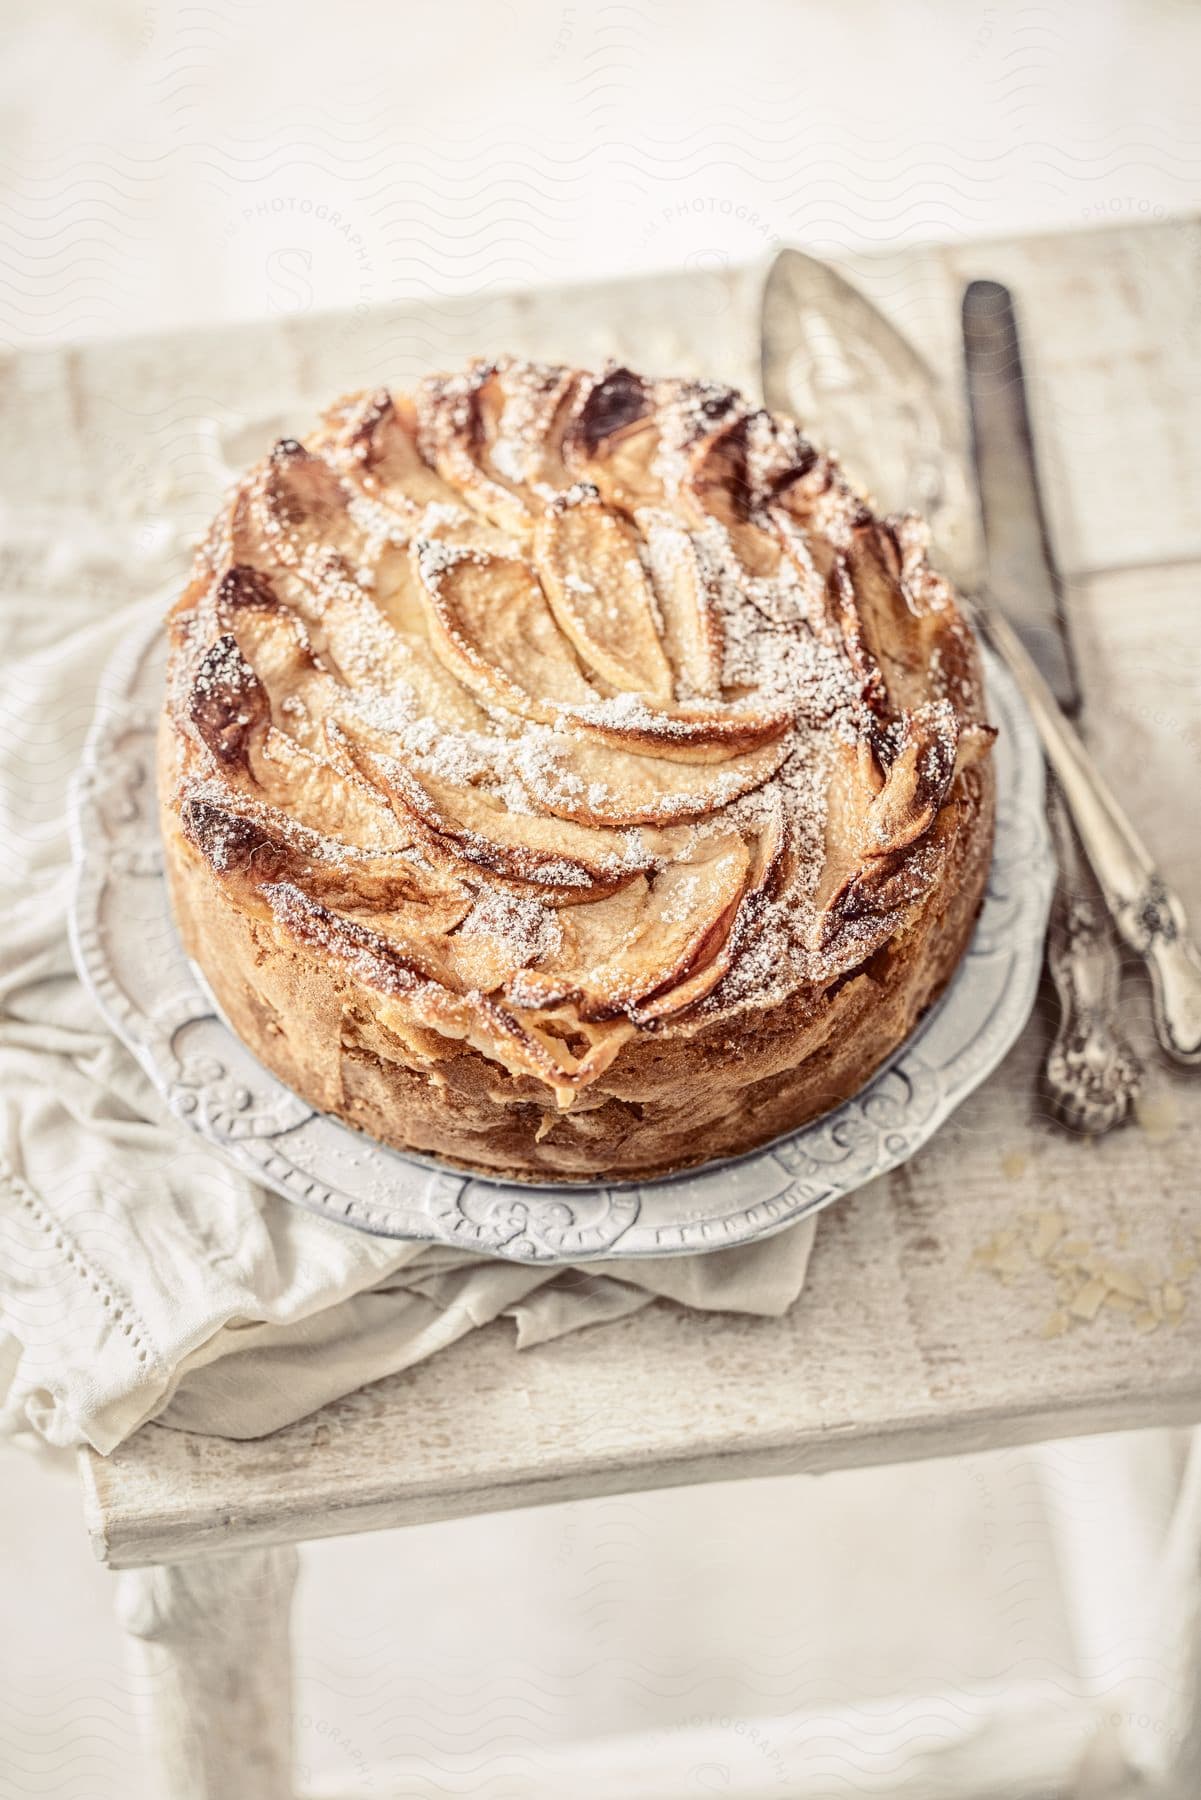 Apple cake dusted with powdered sugar, served on a decorative plate with antique utensils on a rustic white wooden table.